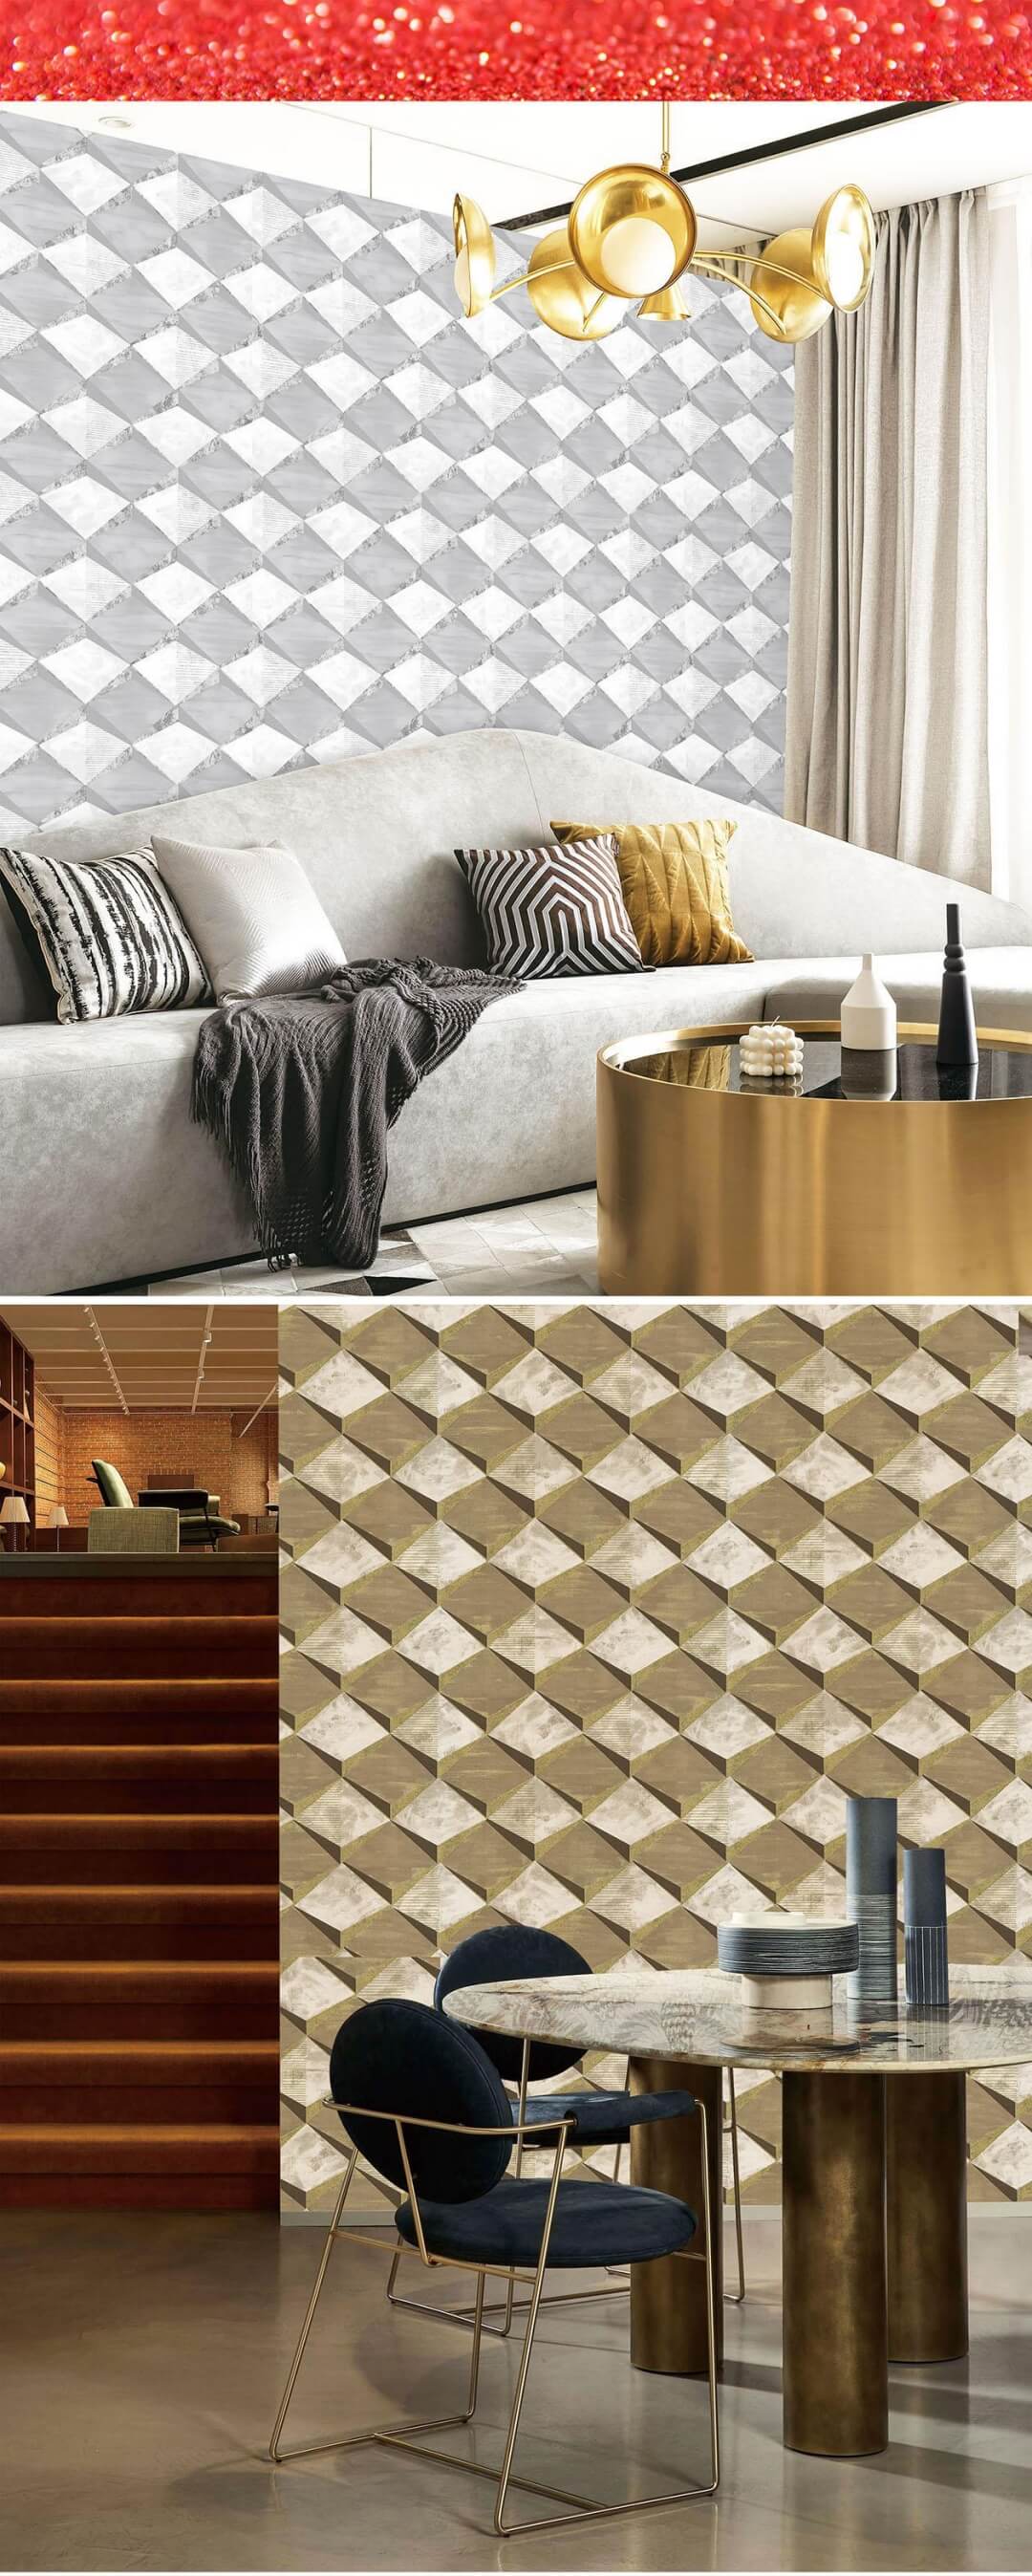 3D Wallpaper for home decoration (31)